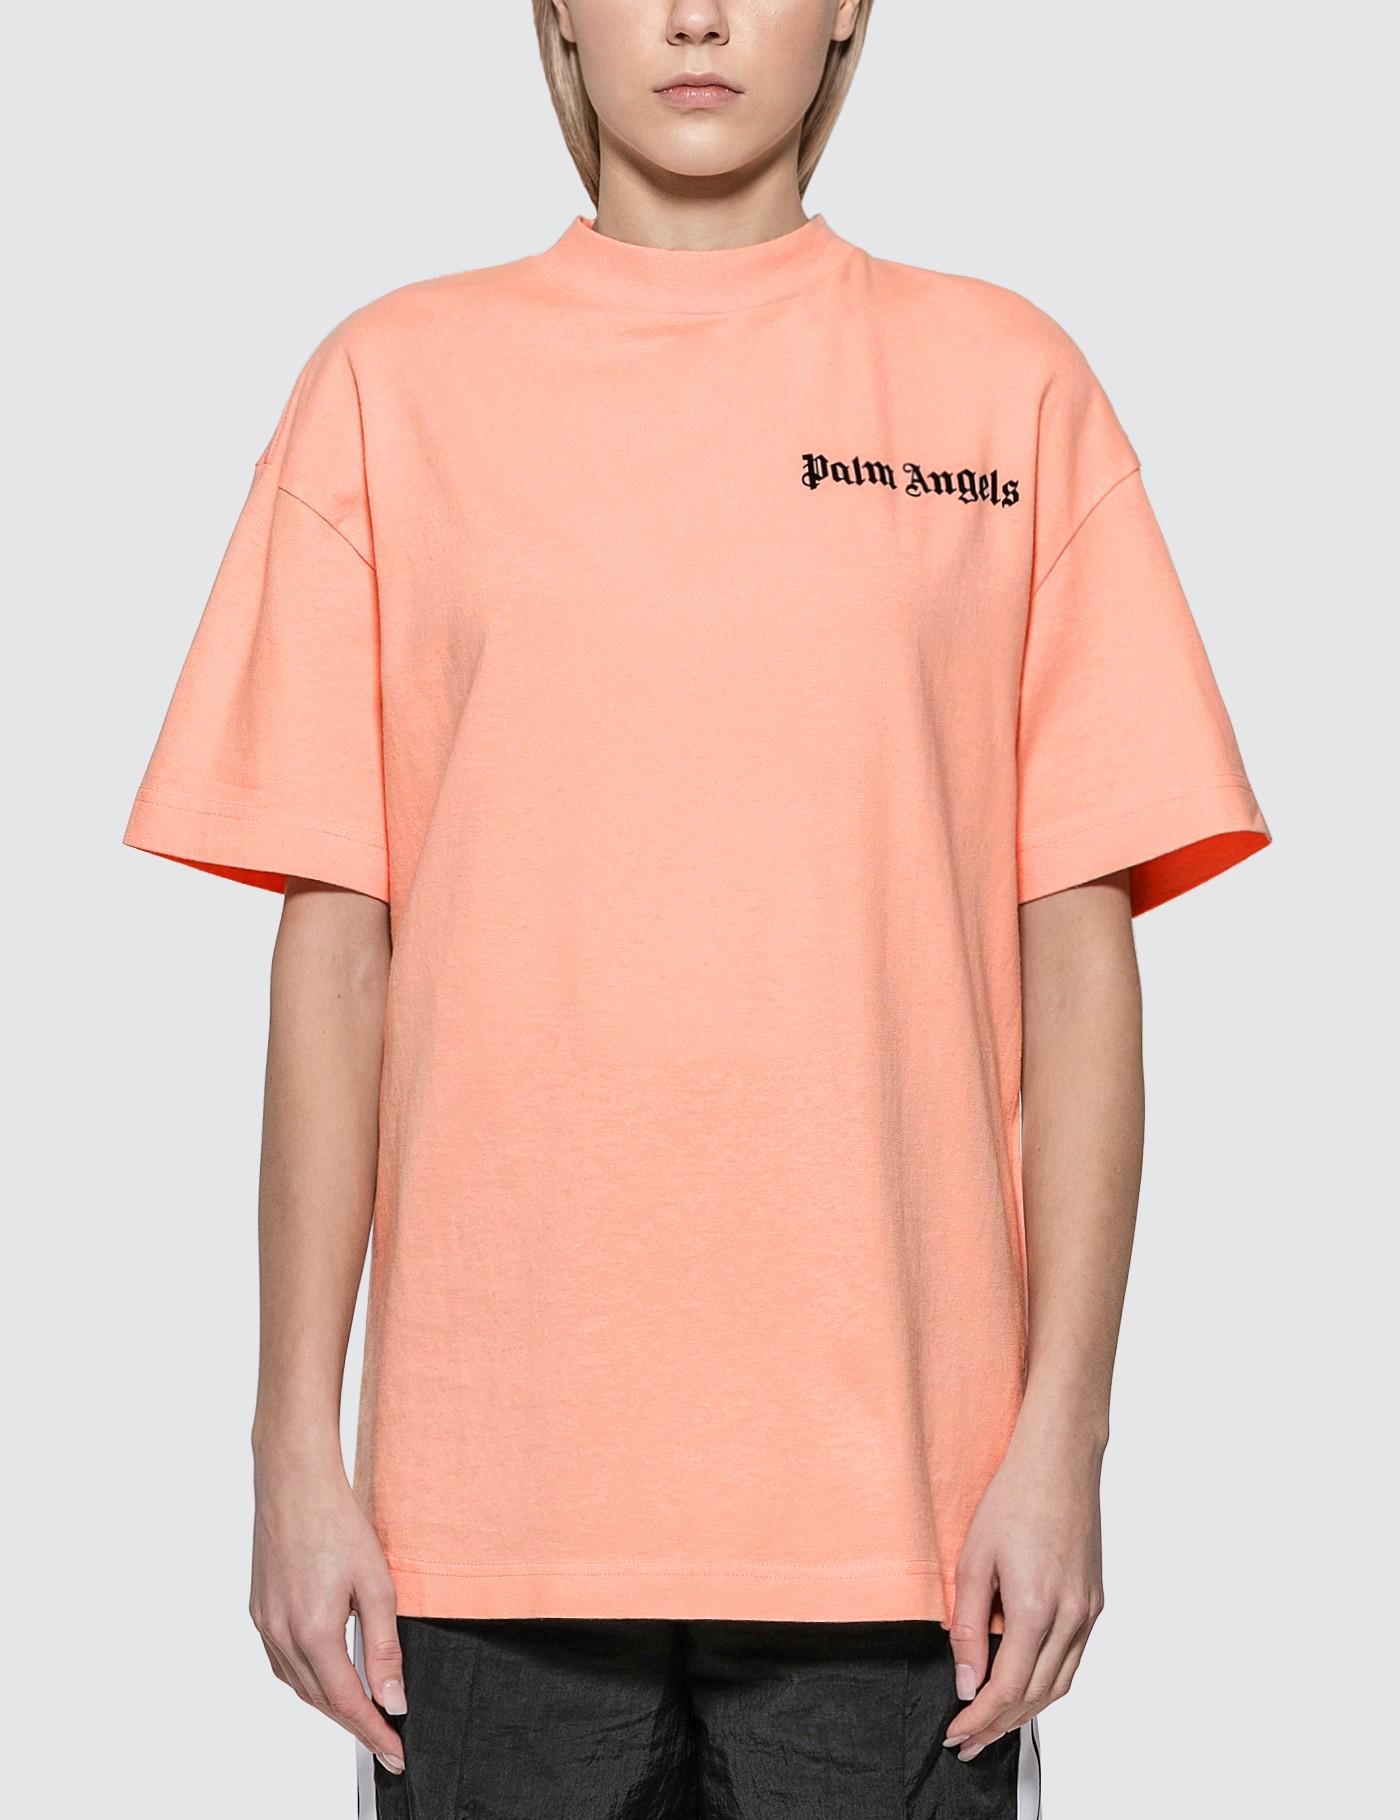 Palm Angels Cotton New Basic T-shirt in Pink - Lyst